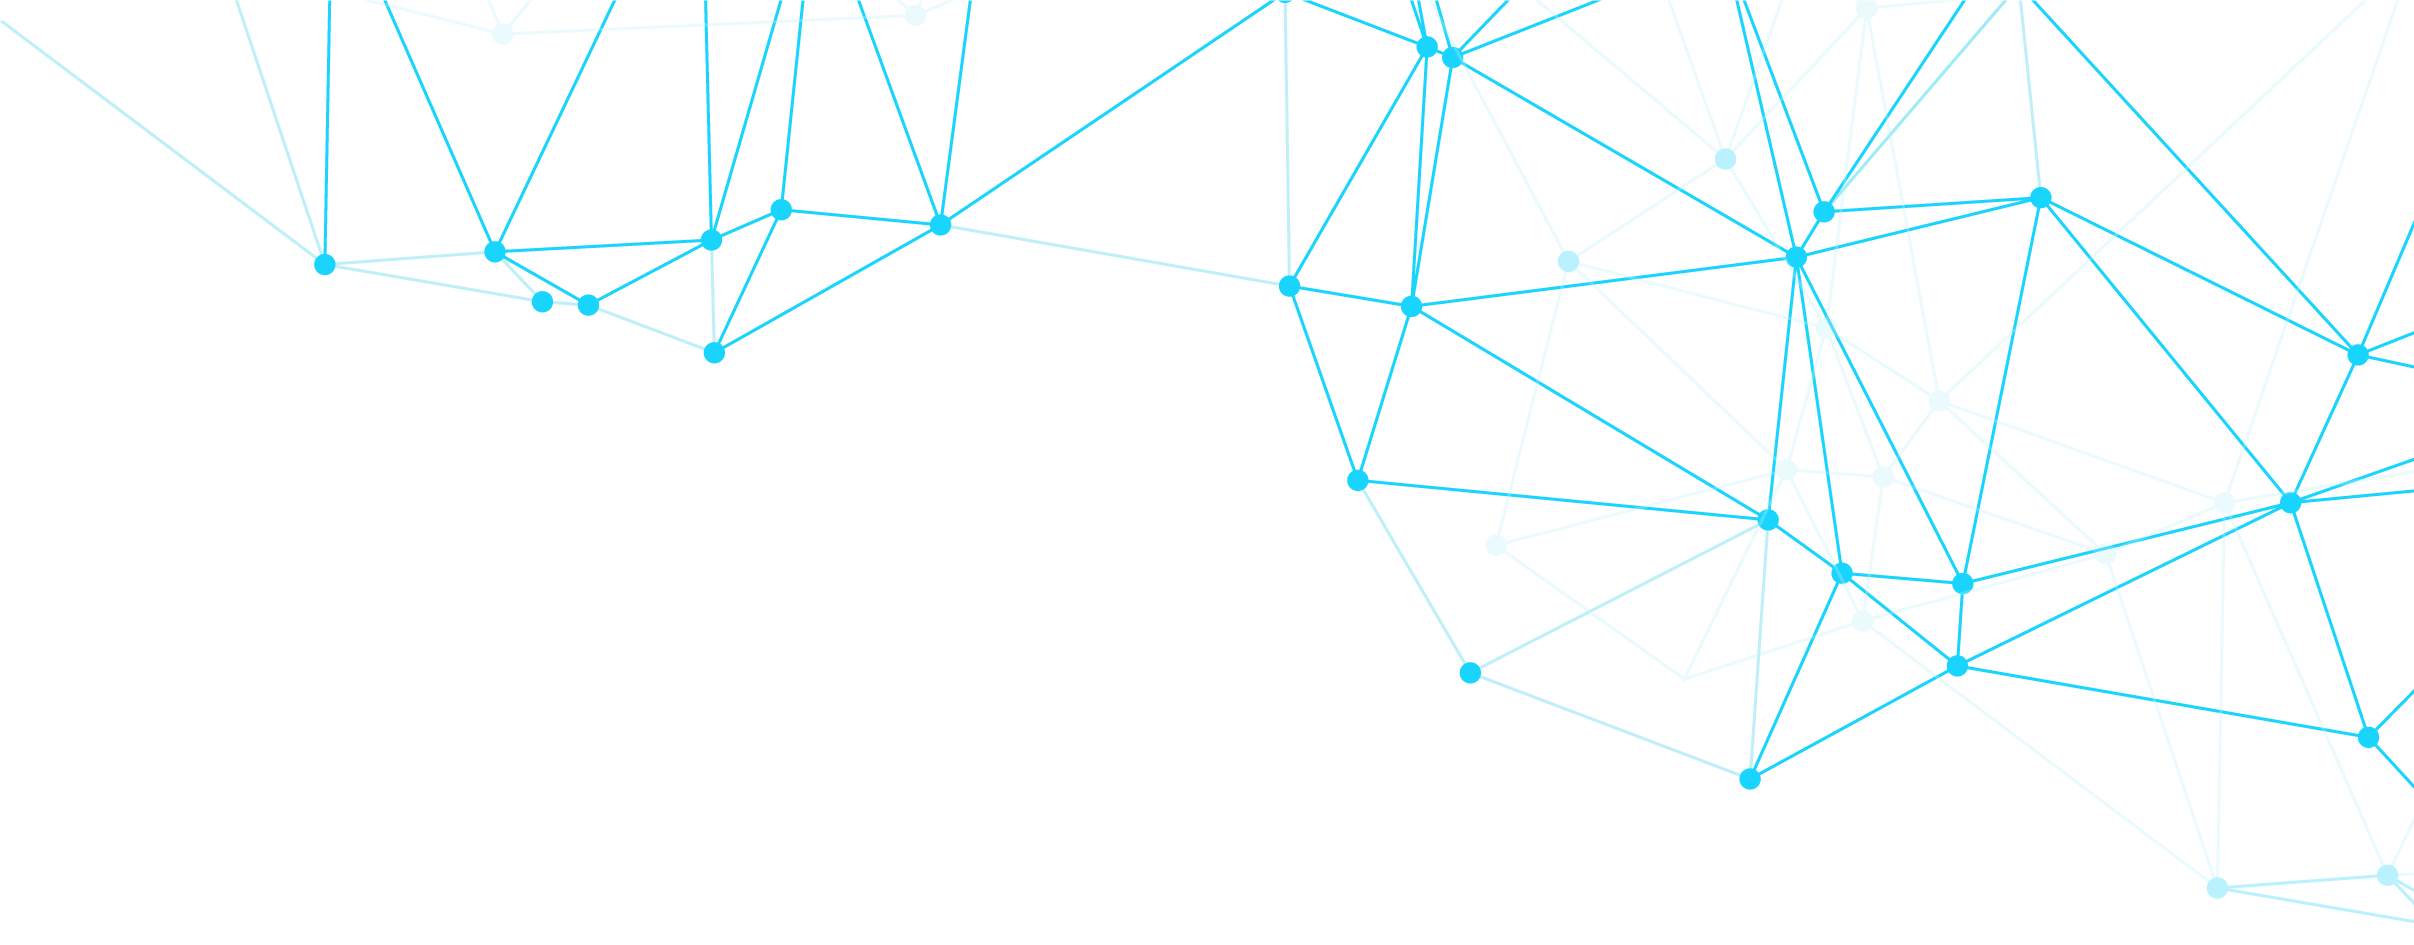 Illustration of a complex network of interconnected blue lines and nodes on a dark background, depicting data connections or a web structure related to get Fibion quotes.